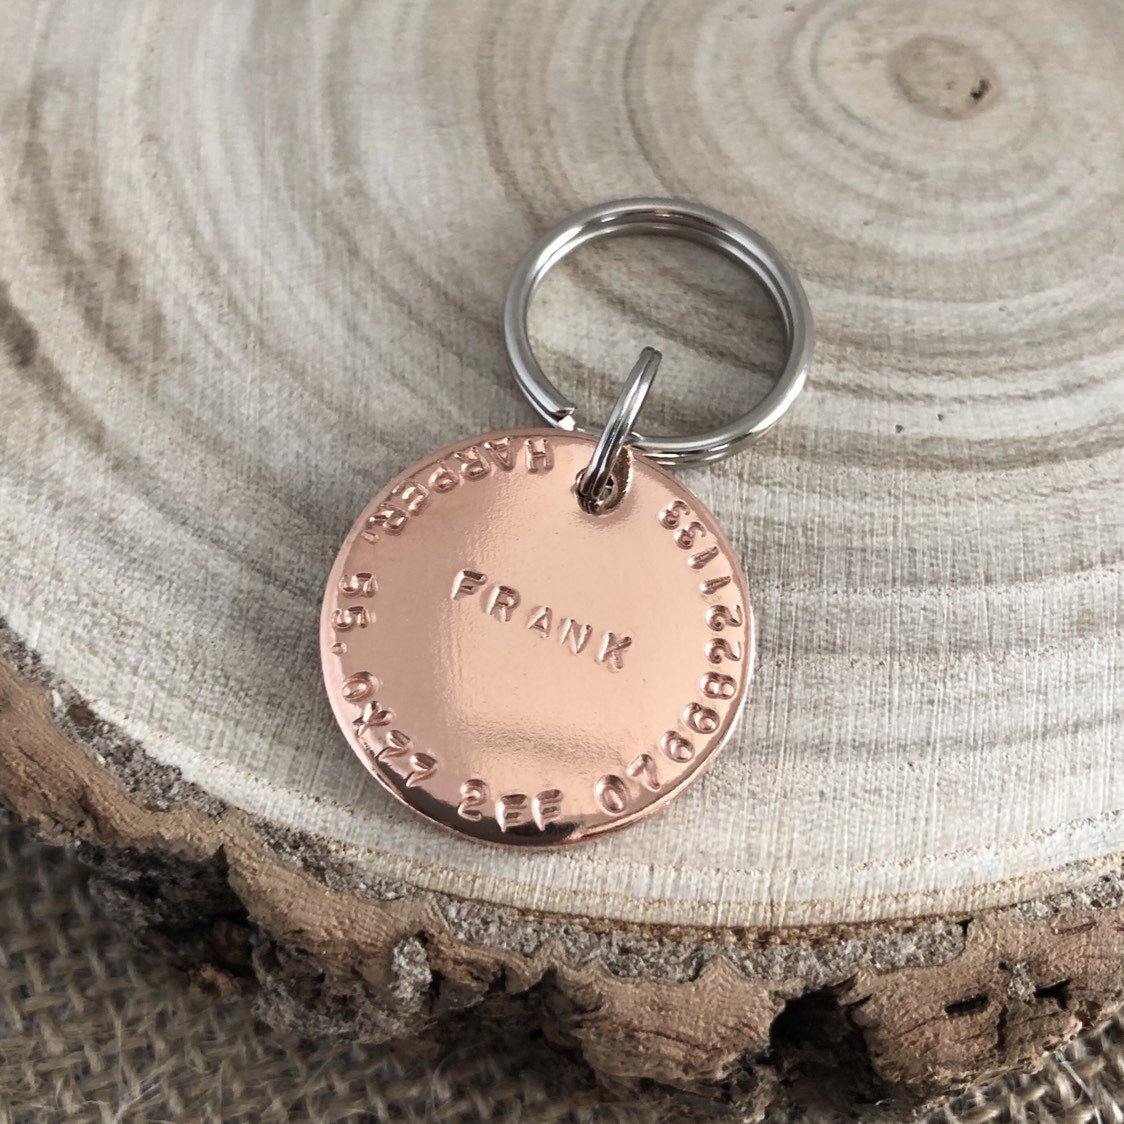 Dog Tag Personalised, Dog Tag for Dogs, Pet ID Tag, Copper or Aluminium - The Little Stamping Co.